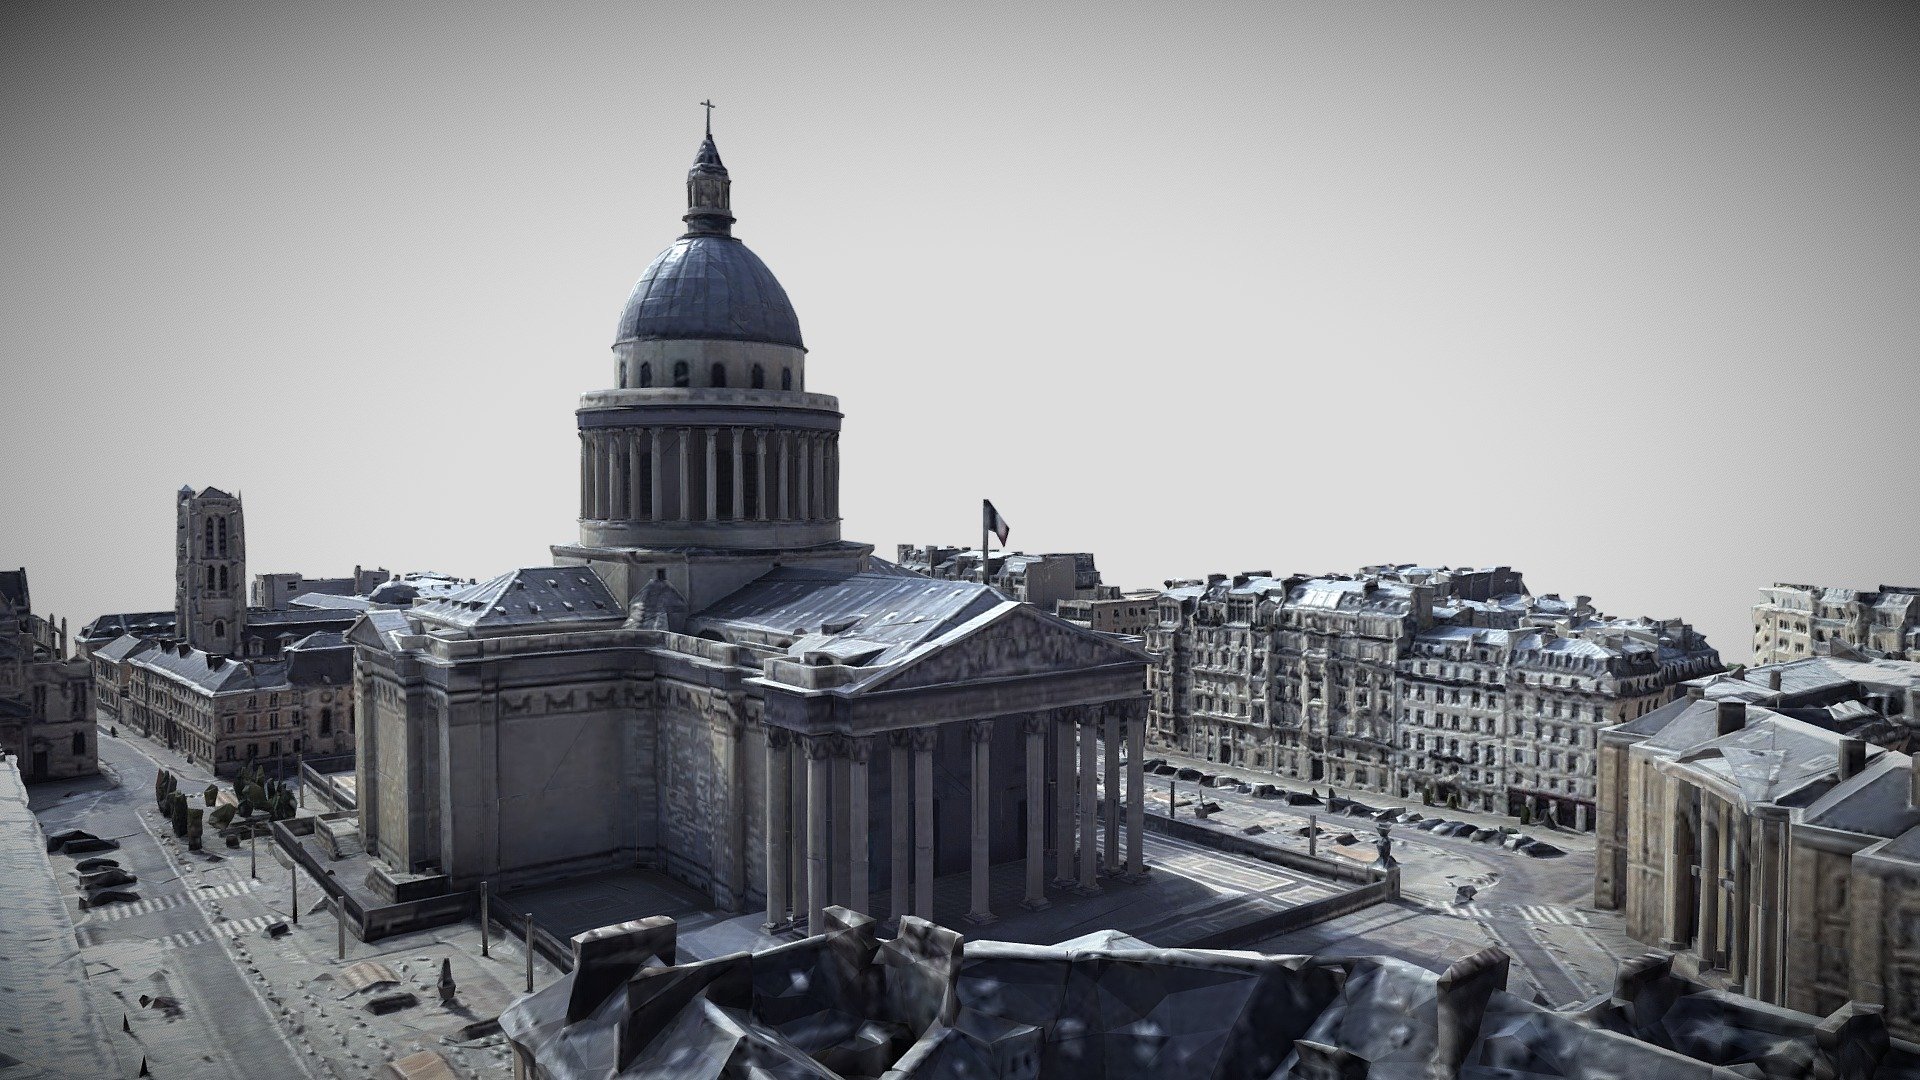 The Panthéon, from the Classical Greek word πάνθειον, pántheion, is a monument in the 5th arrondissement of Paris, France. It stands in the Latin Quarter, atop the Montagne Sainte-Geneviève, in the center of the Place du Panthéon, which was named after it. The edifice was built between 1758 and 1790, from designs by Jacques-Germain Soufflot, at the behest of King Louis XV of France; the king intended it as a church dedicated to Saint Genevieve, Paris' patron saint, whose relics were to be housed in the church. Neither Soufflot nor Louis XV lived to see the church completed.

source : wikipedia



Kindly support me on Patreon and Artsation

I really need  your support to continue. 😁 - Pantheon - 3D model by mohamedhussien 3d model